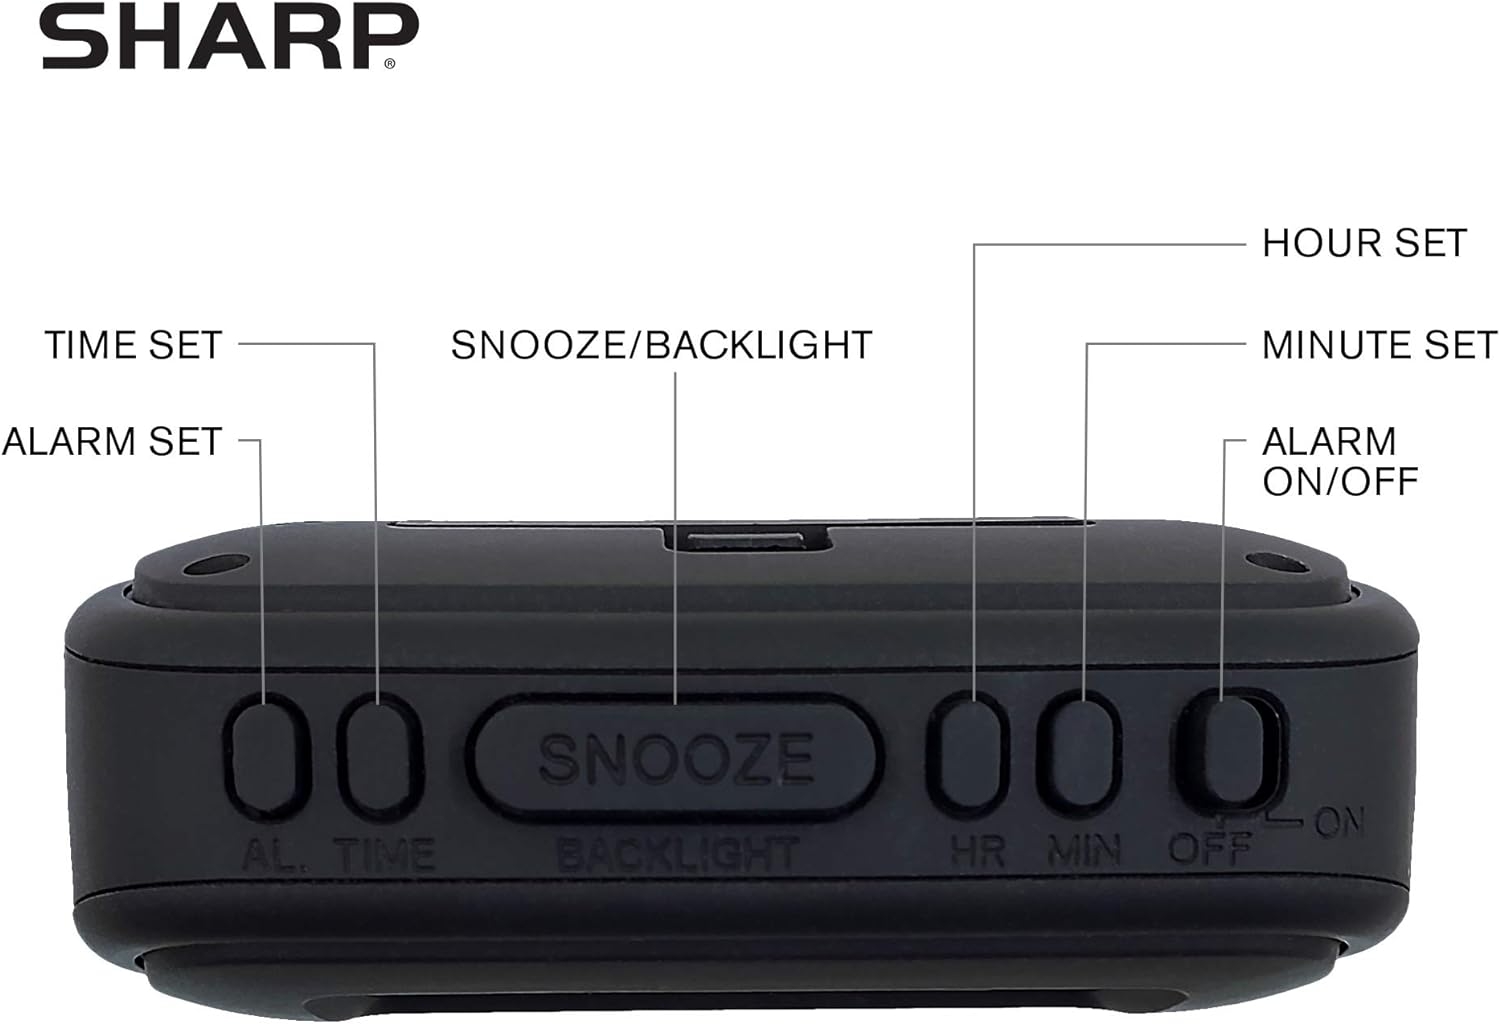 SHARP Digital Alarm Clock – Tactile Case with Soft Rubberized Finish - Battery Operated – Blue Backlight on Demand – Ascending Alarm – Easy to Use - Black